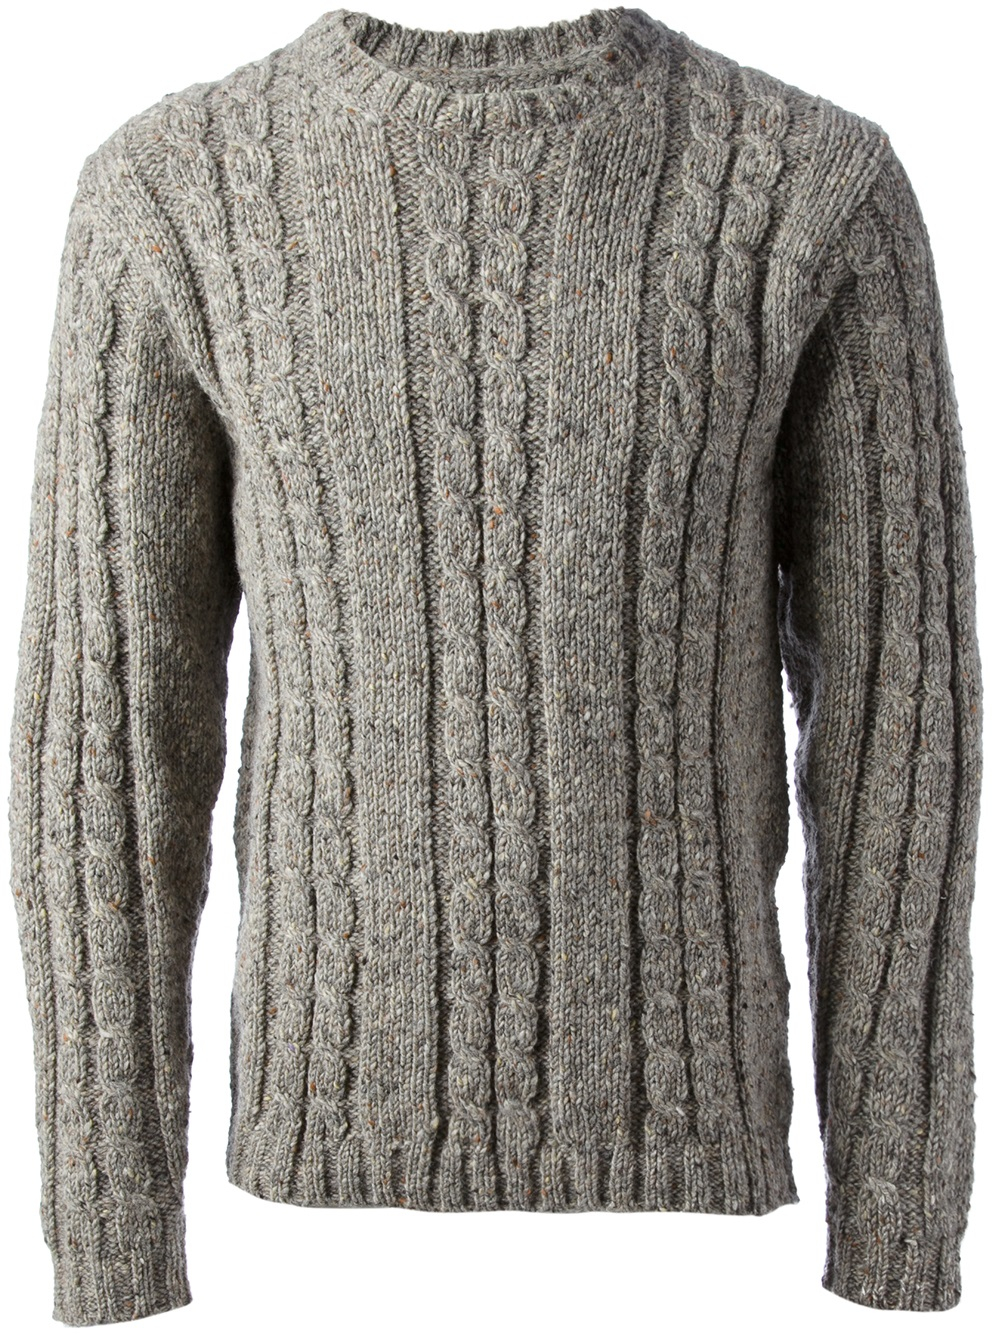 Lyst Mr Start Cable Knit Sweater In Gray For Men